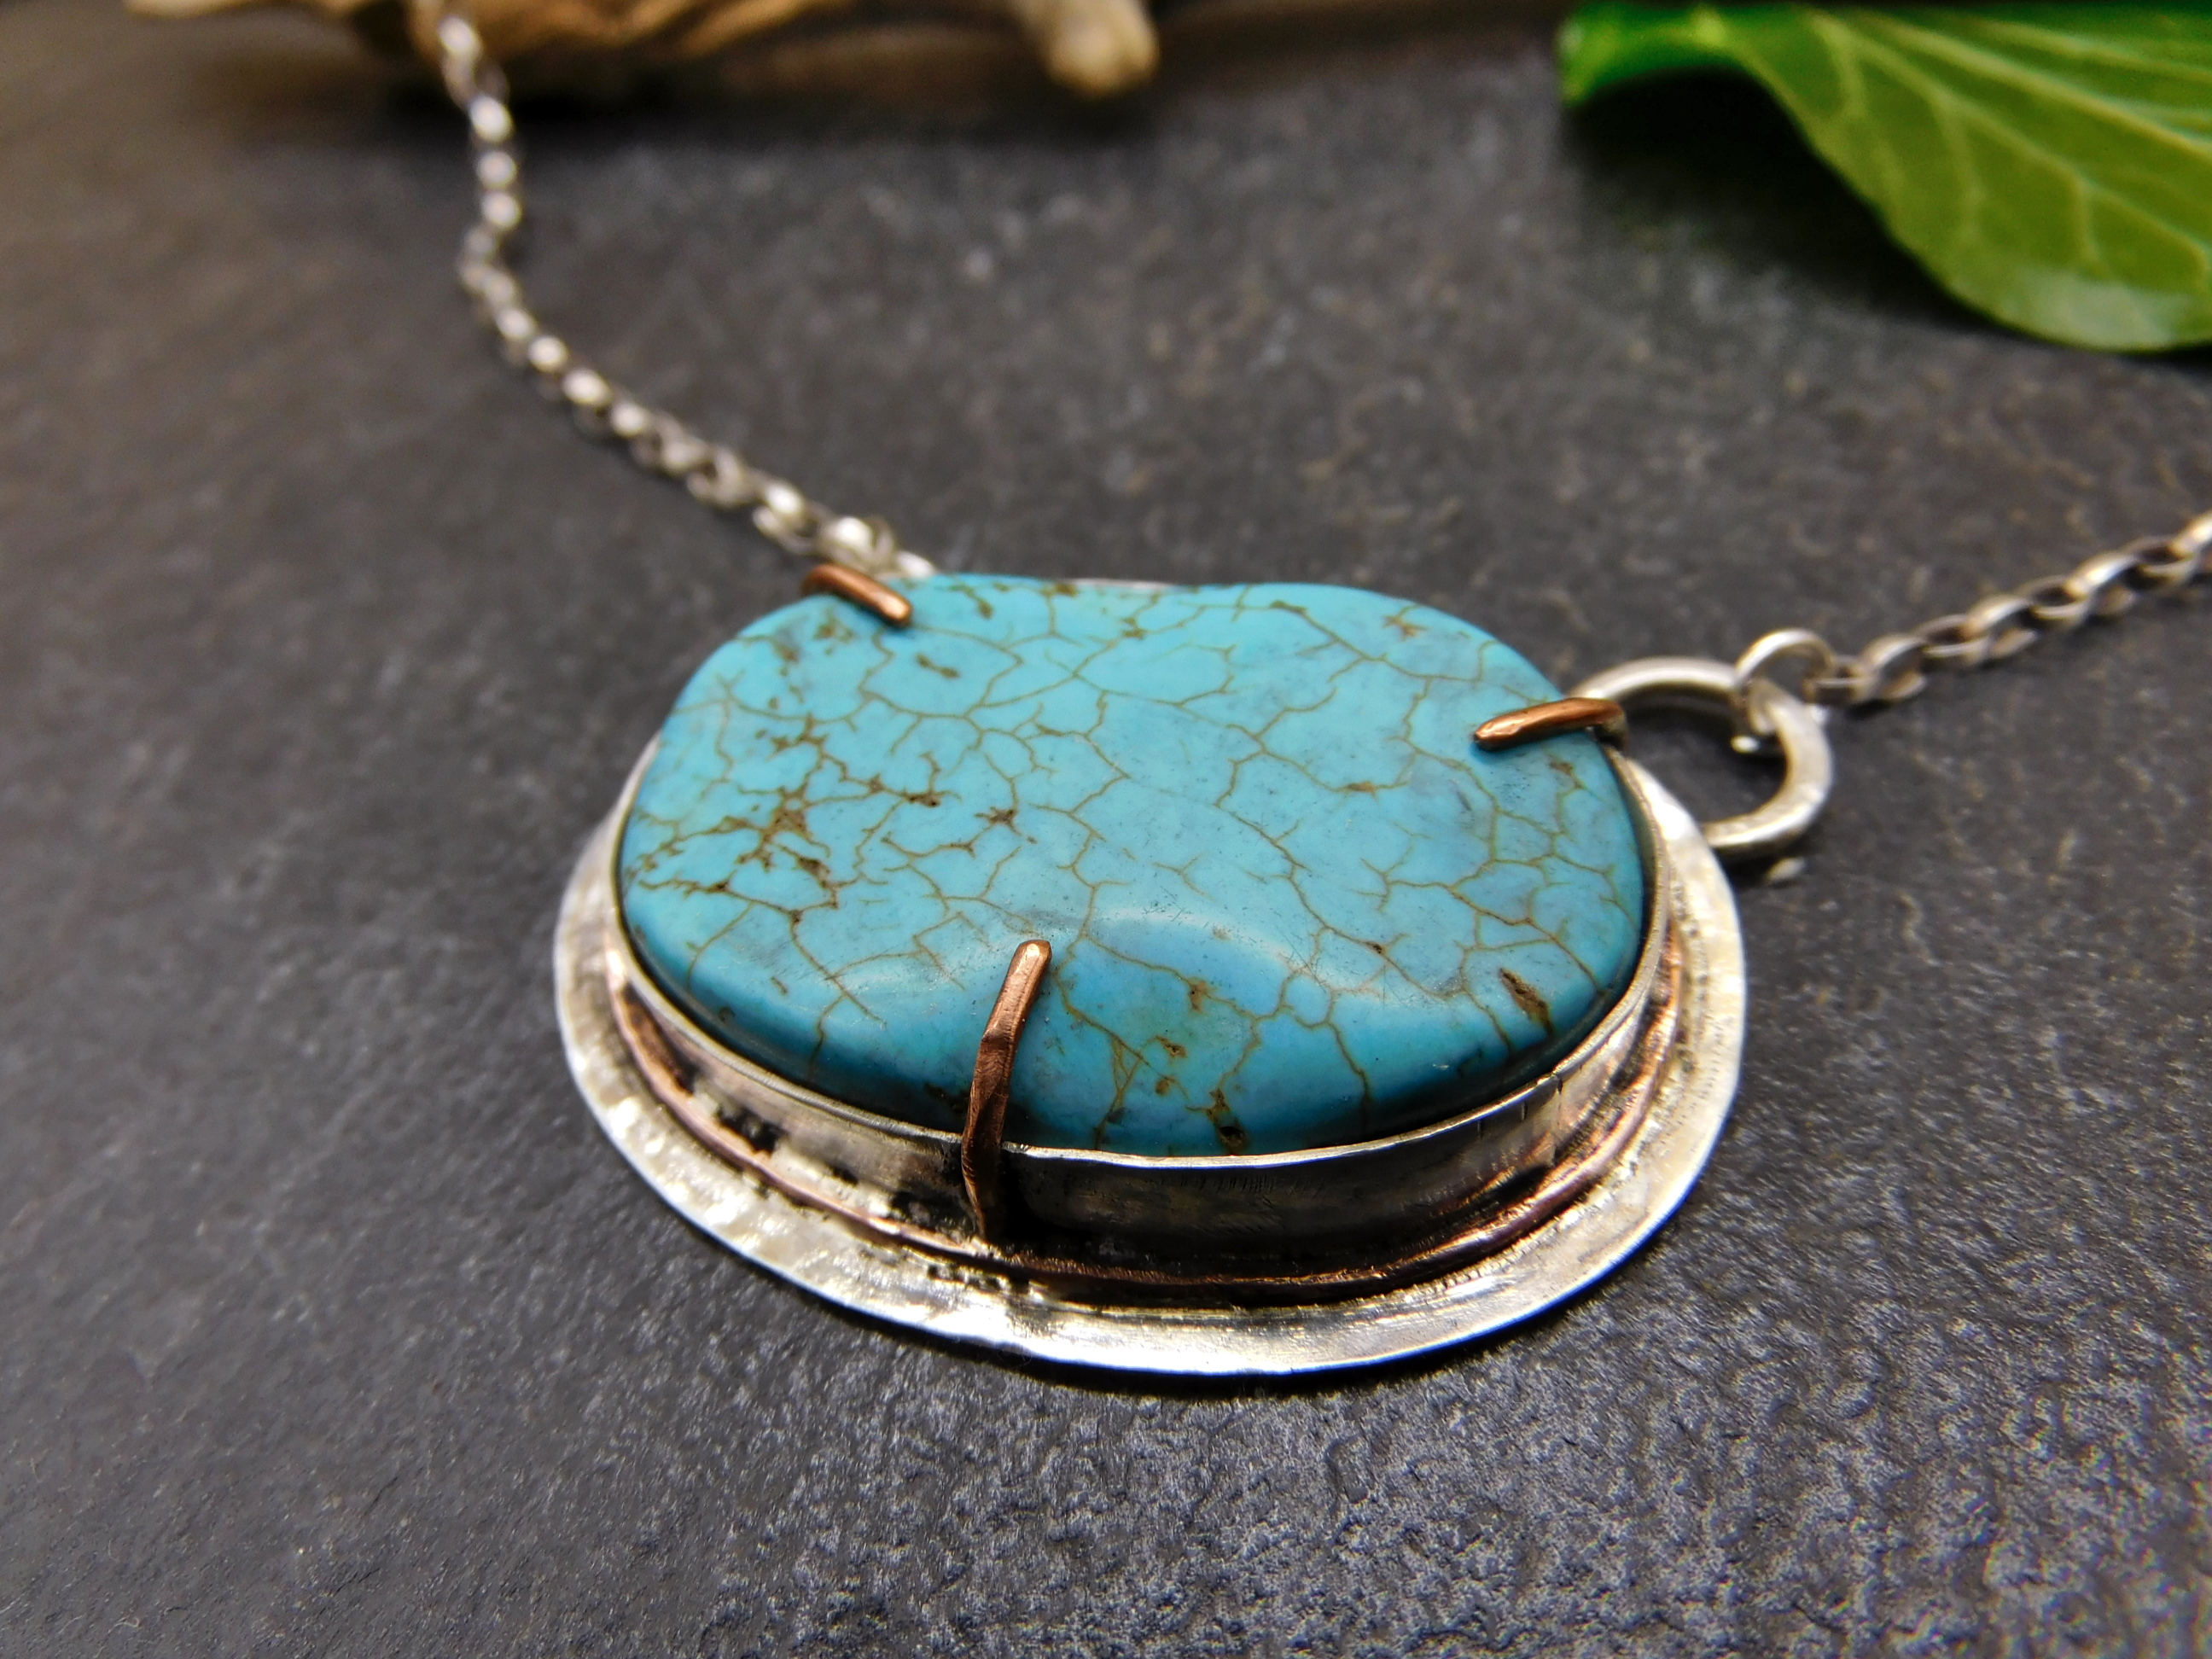 Pendant with turquoise Howlite stone set in sterling silver and copper